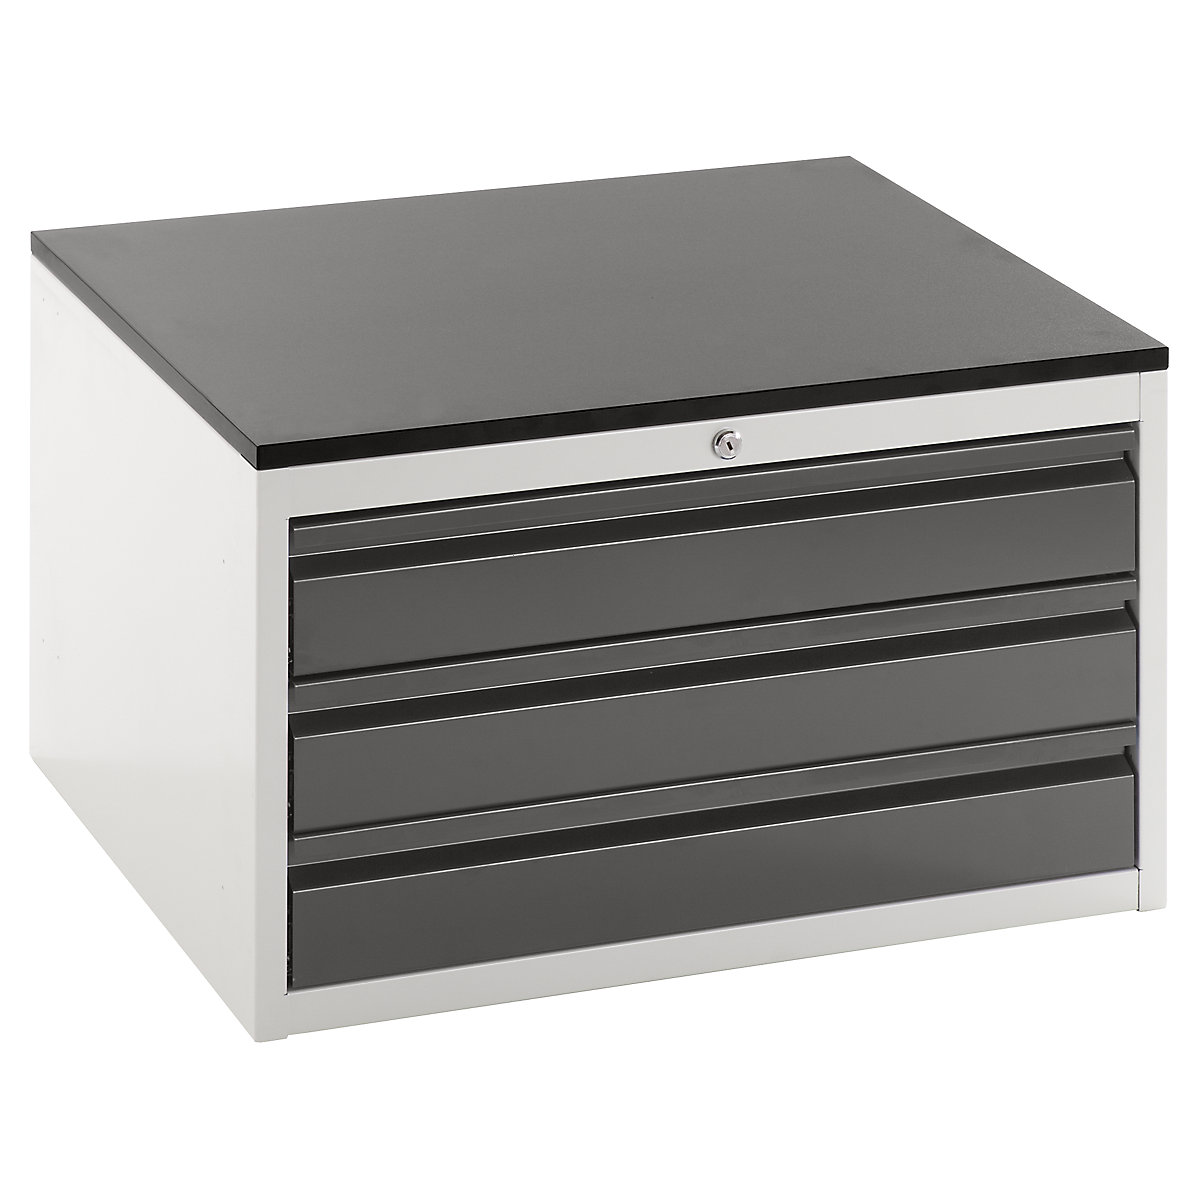 Drawer cupboard with telescopic guides – RAU, height 460 mm, 3 x 120 mm drawers, light grey / charcoal, width 770 mm-9